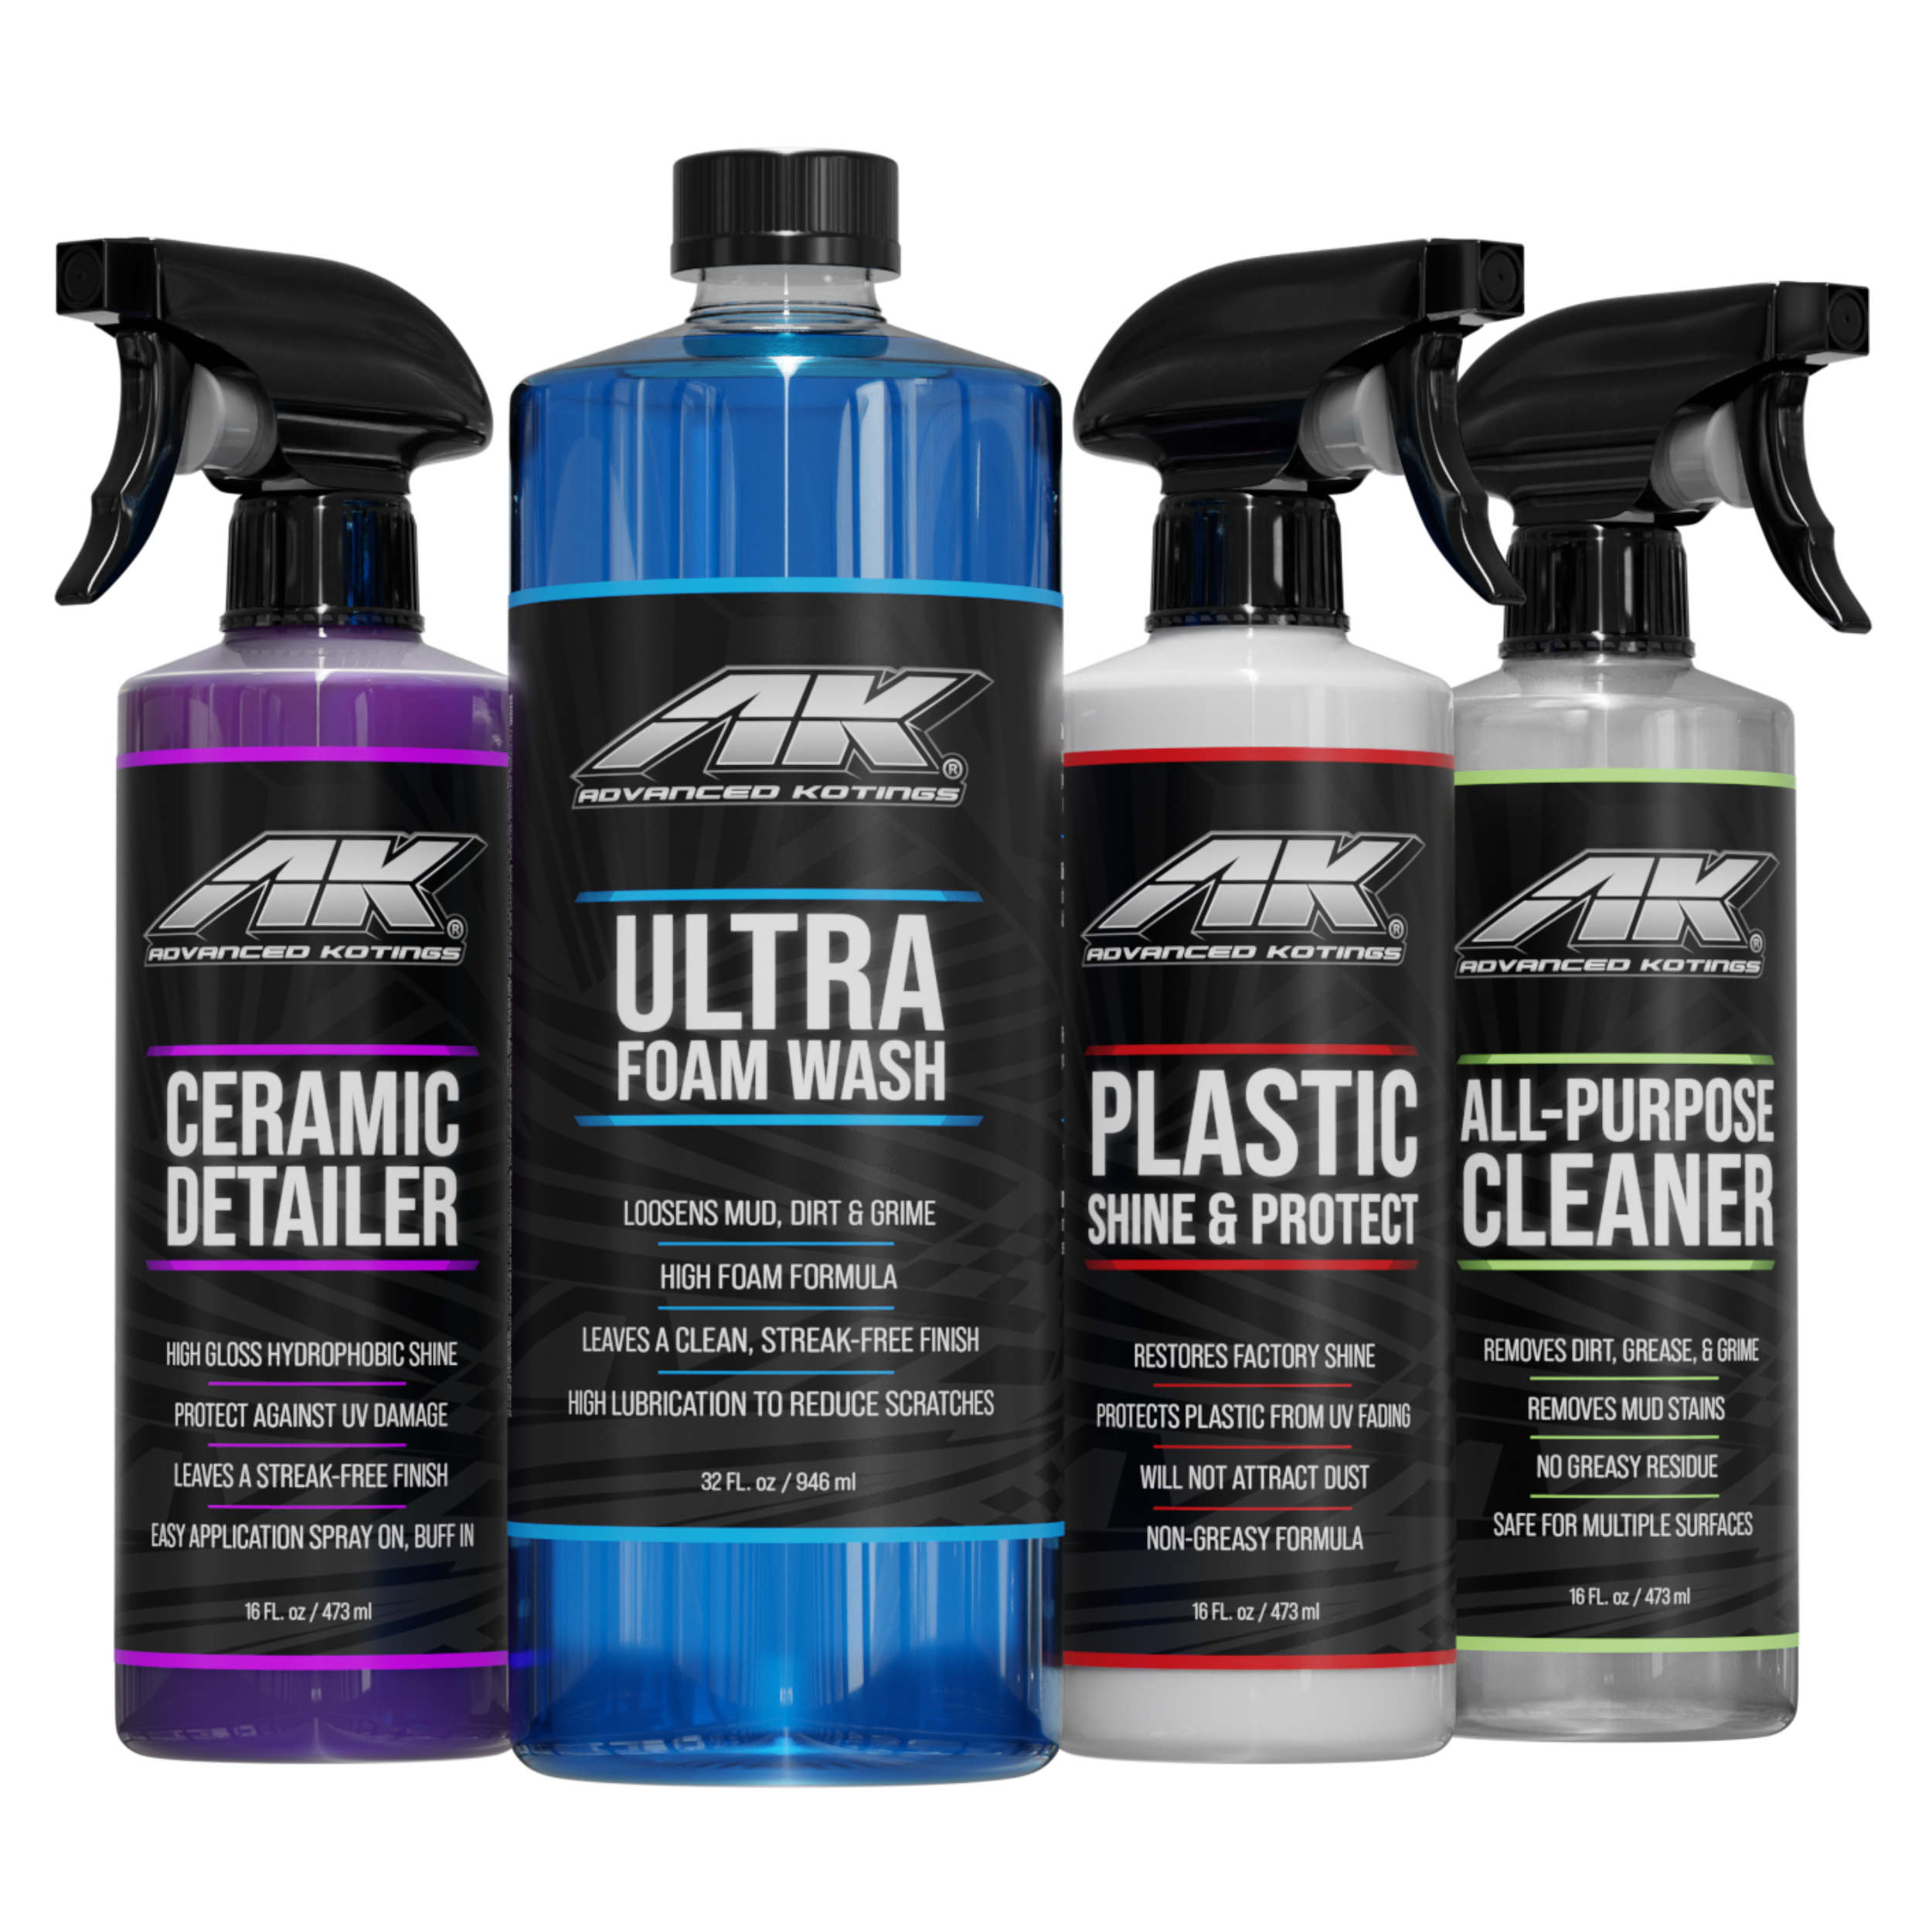 Advanced Kotings Street Series Cleaning & Protection Kit. Car-Truck-Trailer